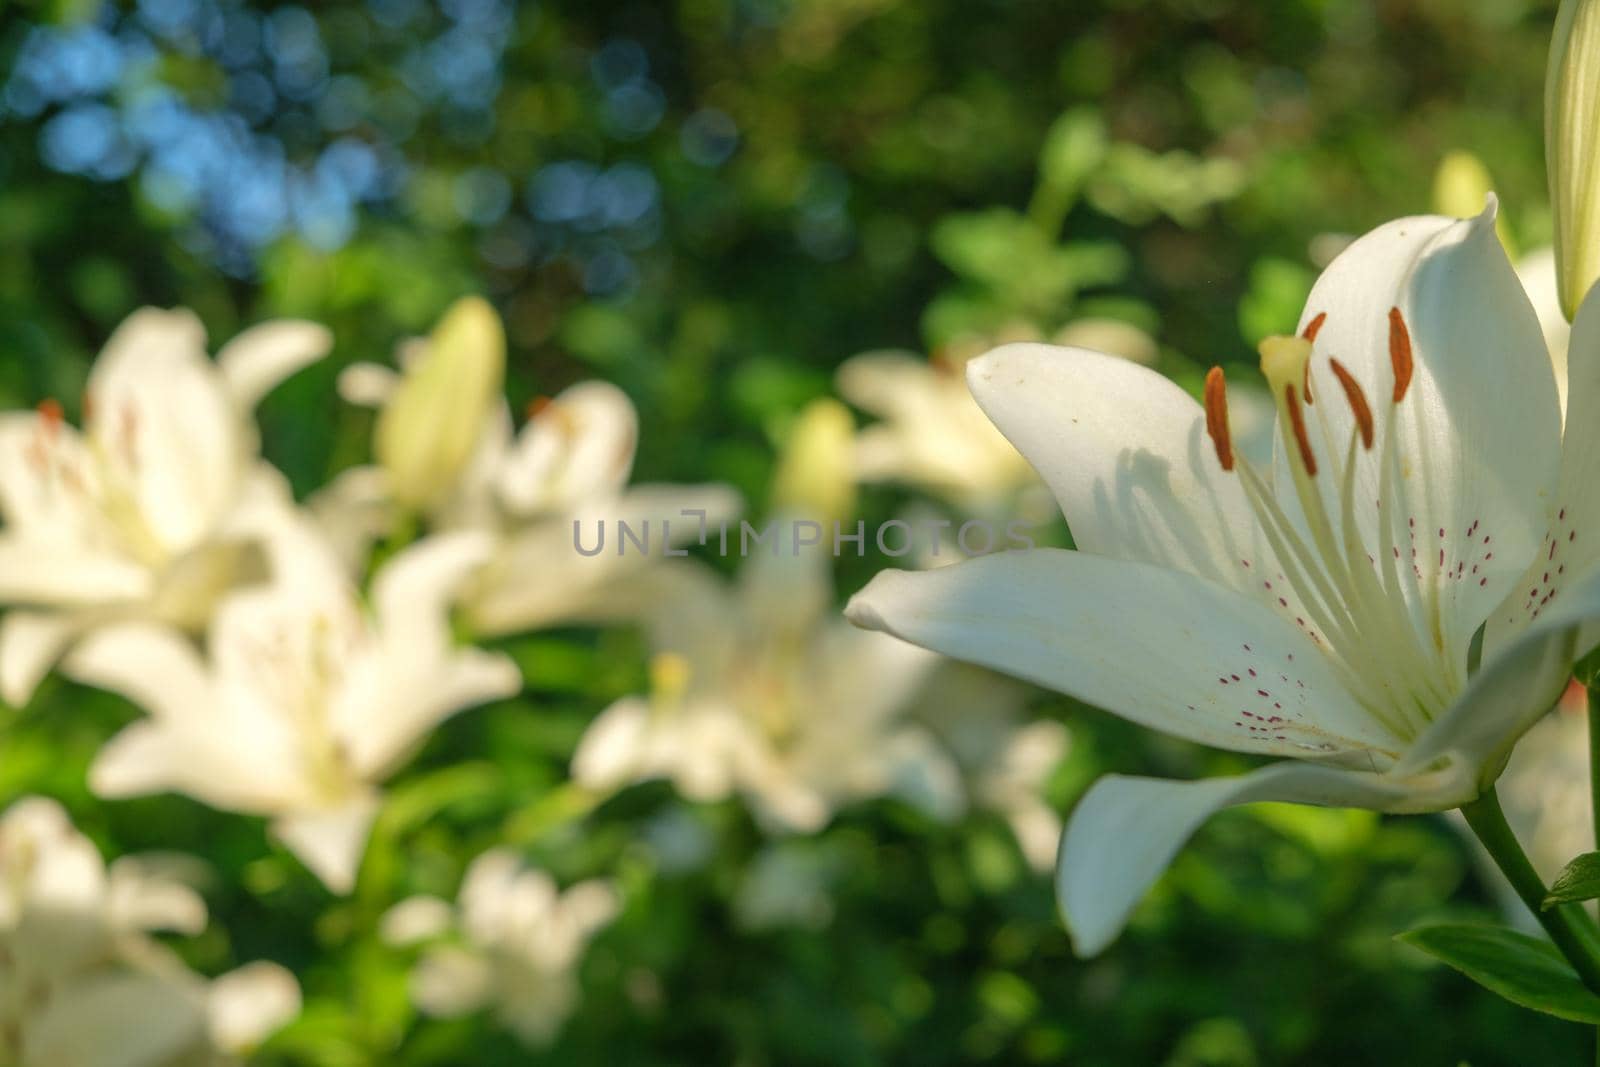 Beautiful Lily flower on green leaves background. Lilium longiflorum flowers in the garden. Background texture plant fire lily with white buds. Image plant blooming orange tropical flower tiger lily